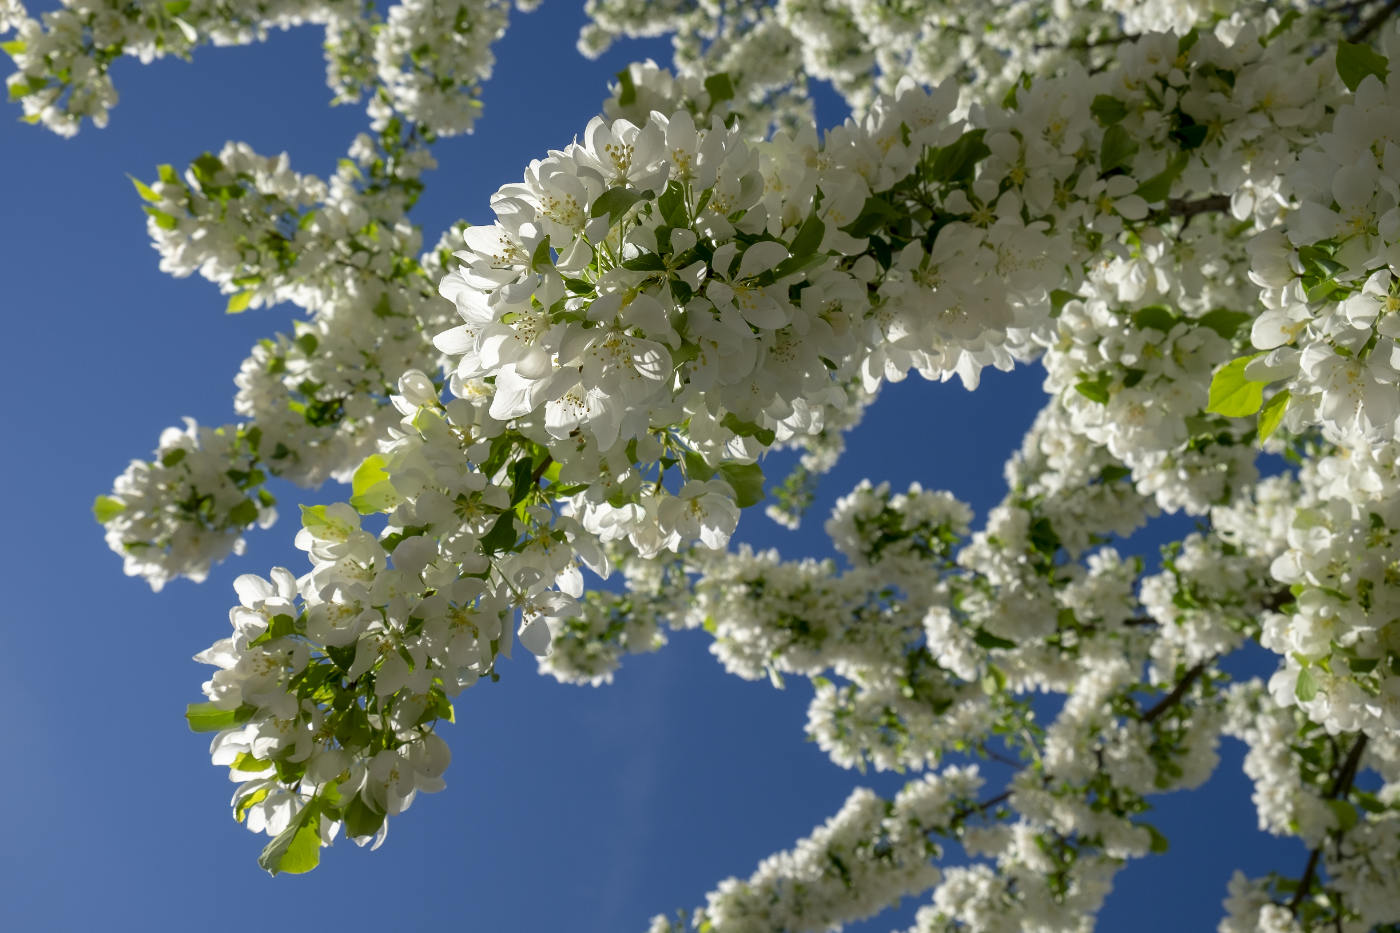 Full white blossoms on tree branches against a bright blue sky